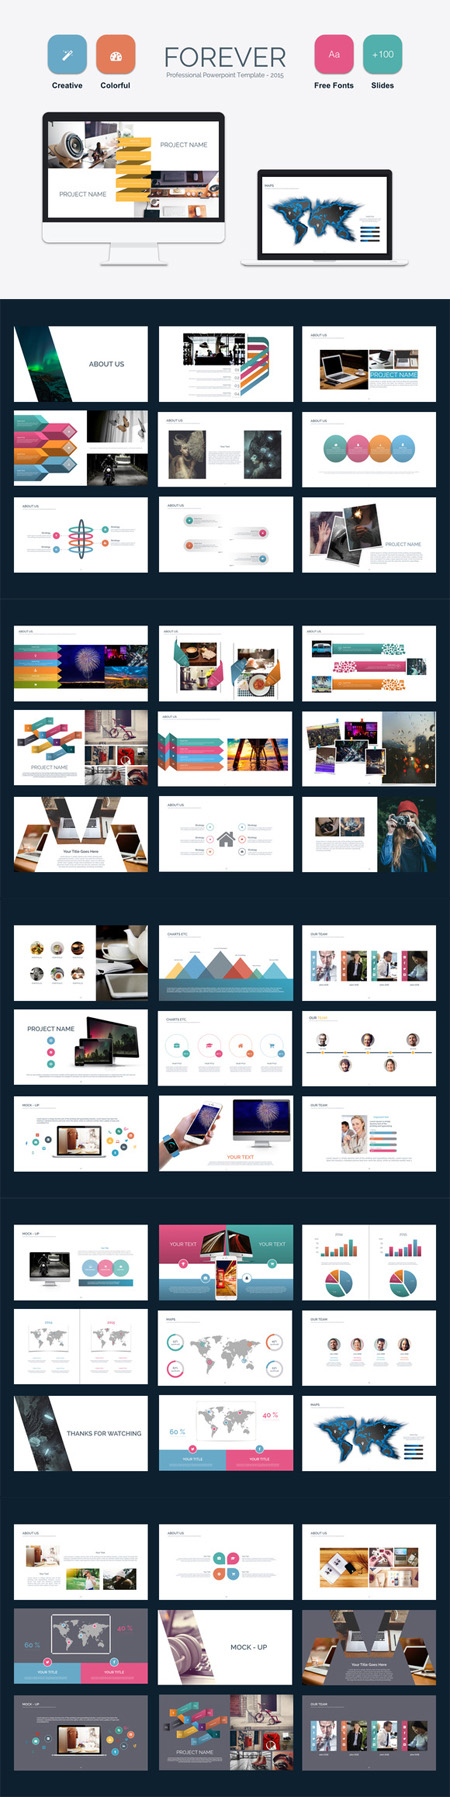 CM - Forever Powerpoint Template 507034